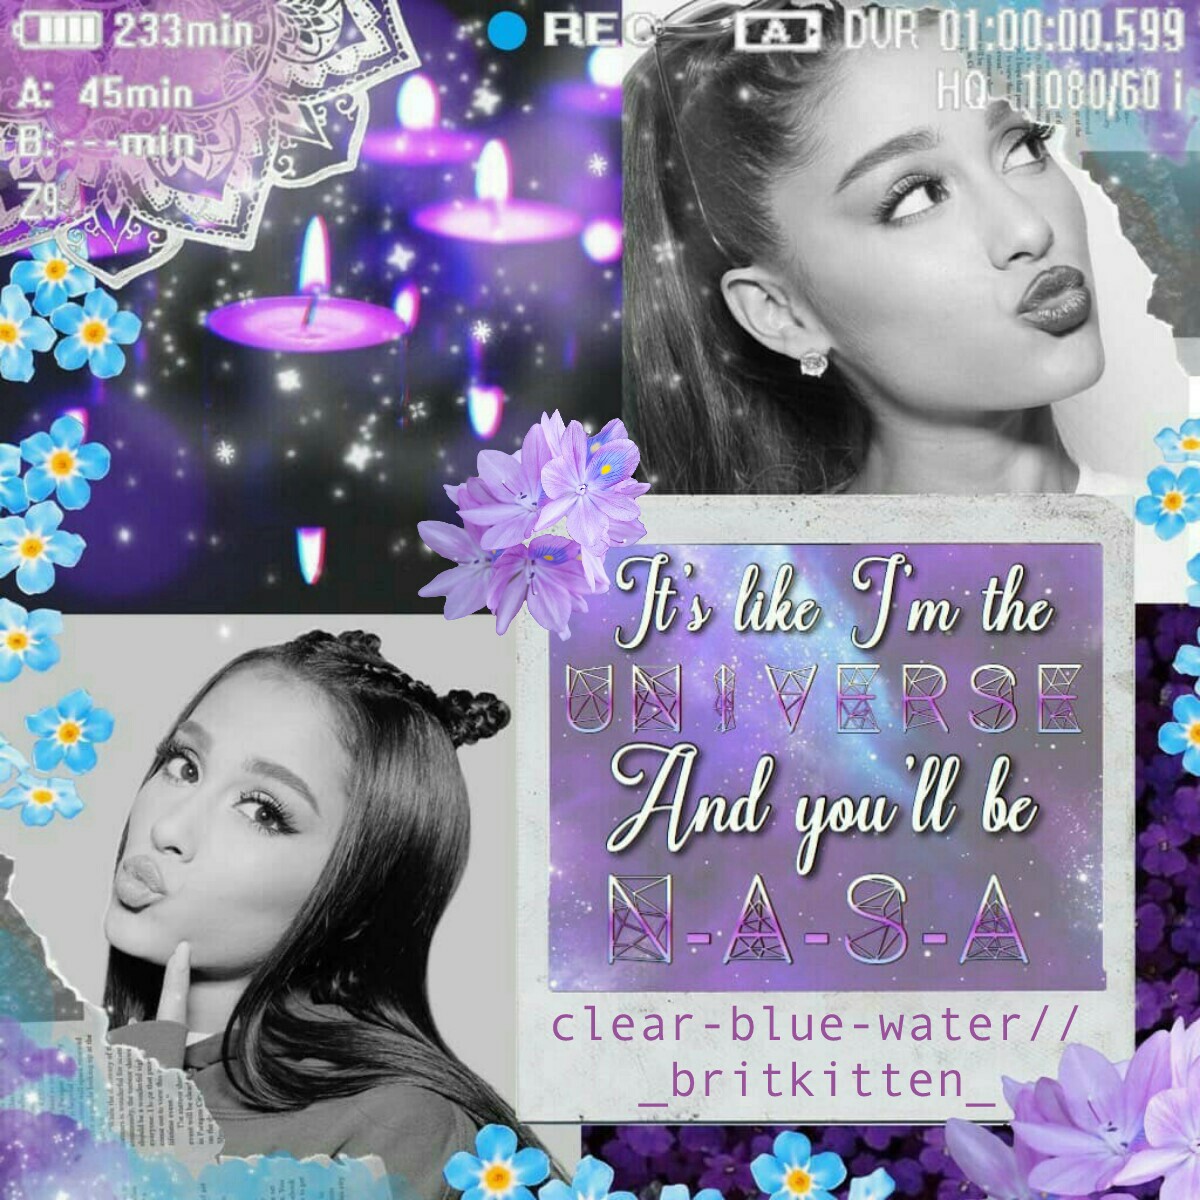 💜T A P💜
Collab with the amazing and talented _britkitten_! 
QOTD: What is your favorite song from Ari?
AOTD: NASA or in my head